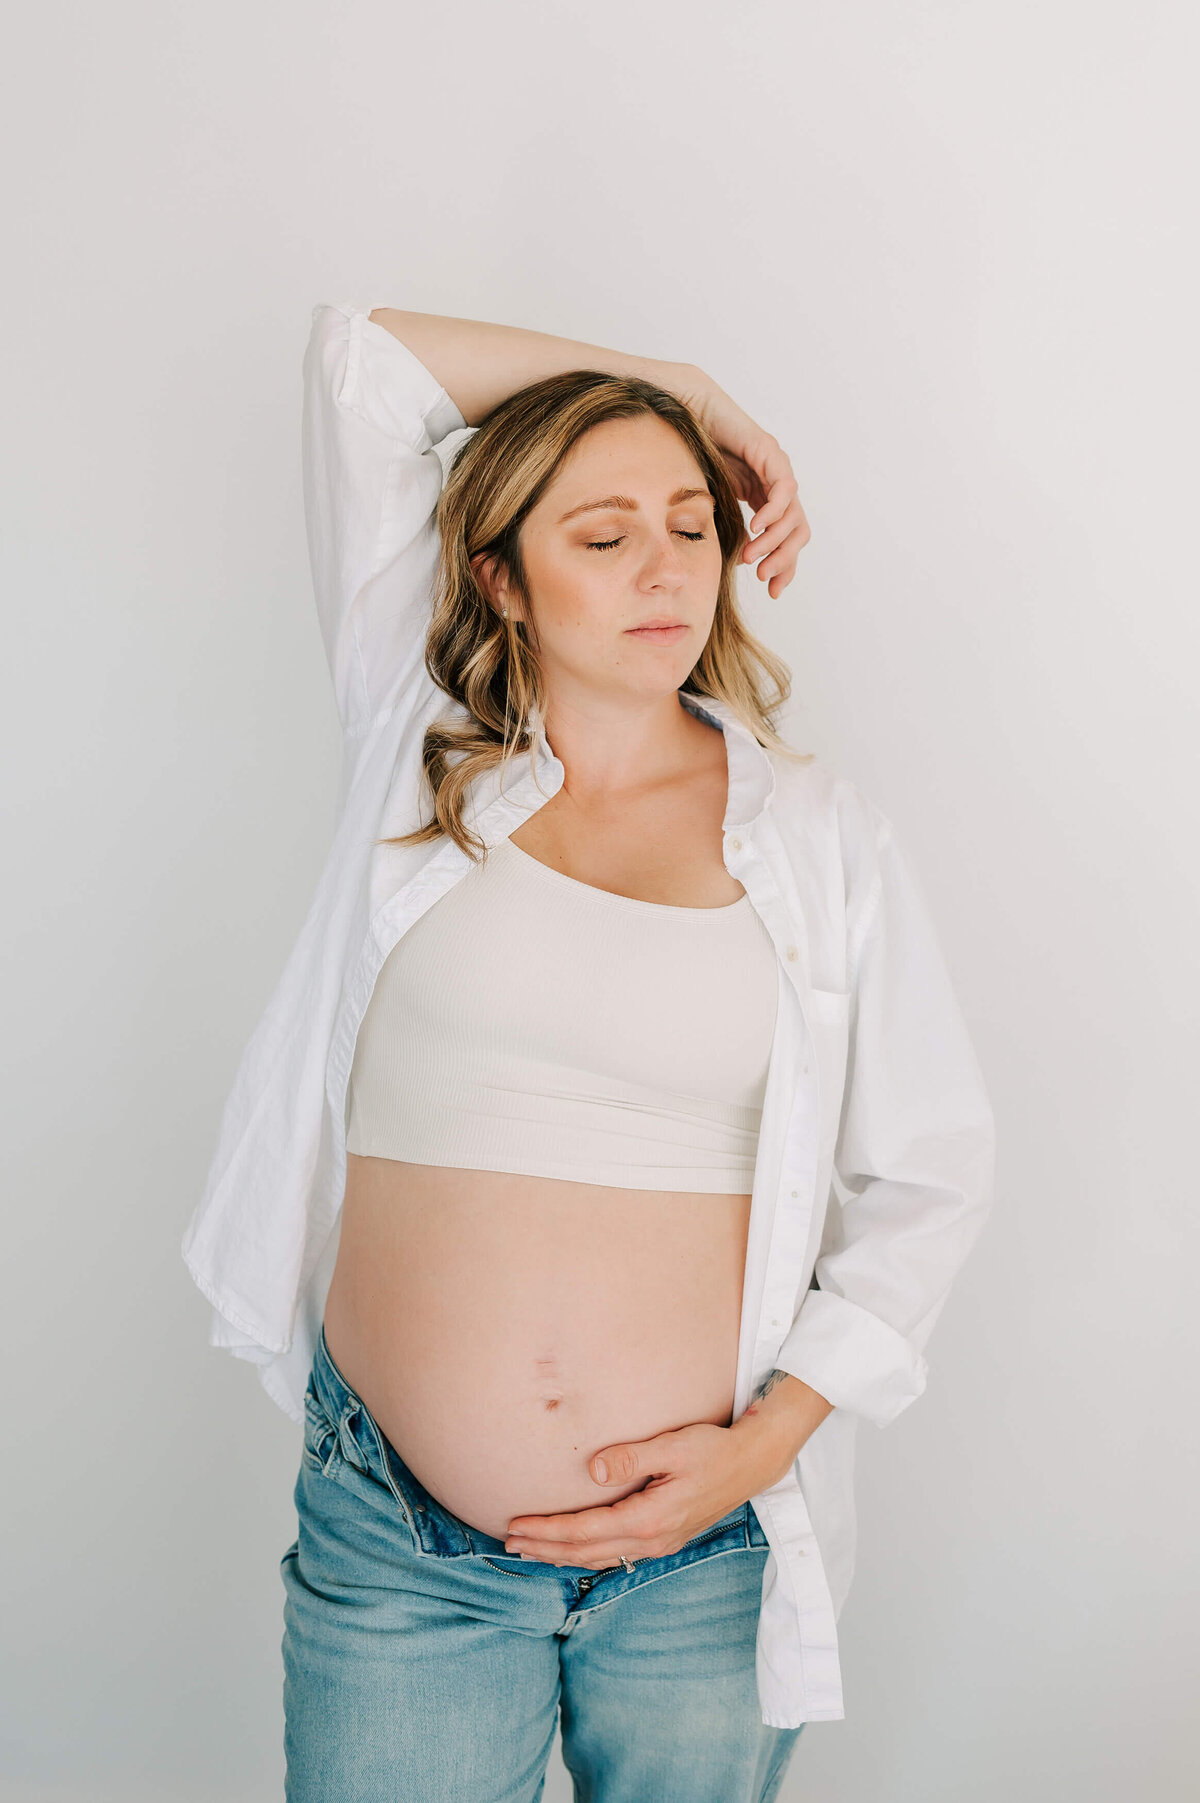 pregnant mom in jeans holding baby bump during studio maternity session in Branson